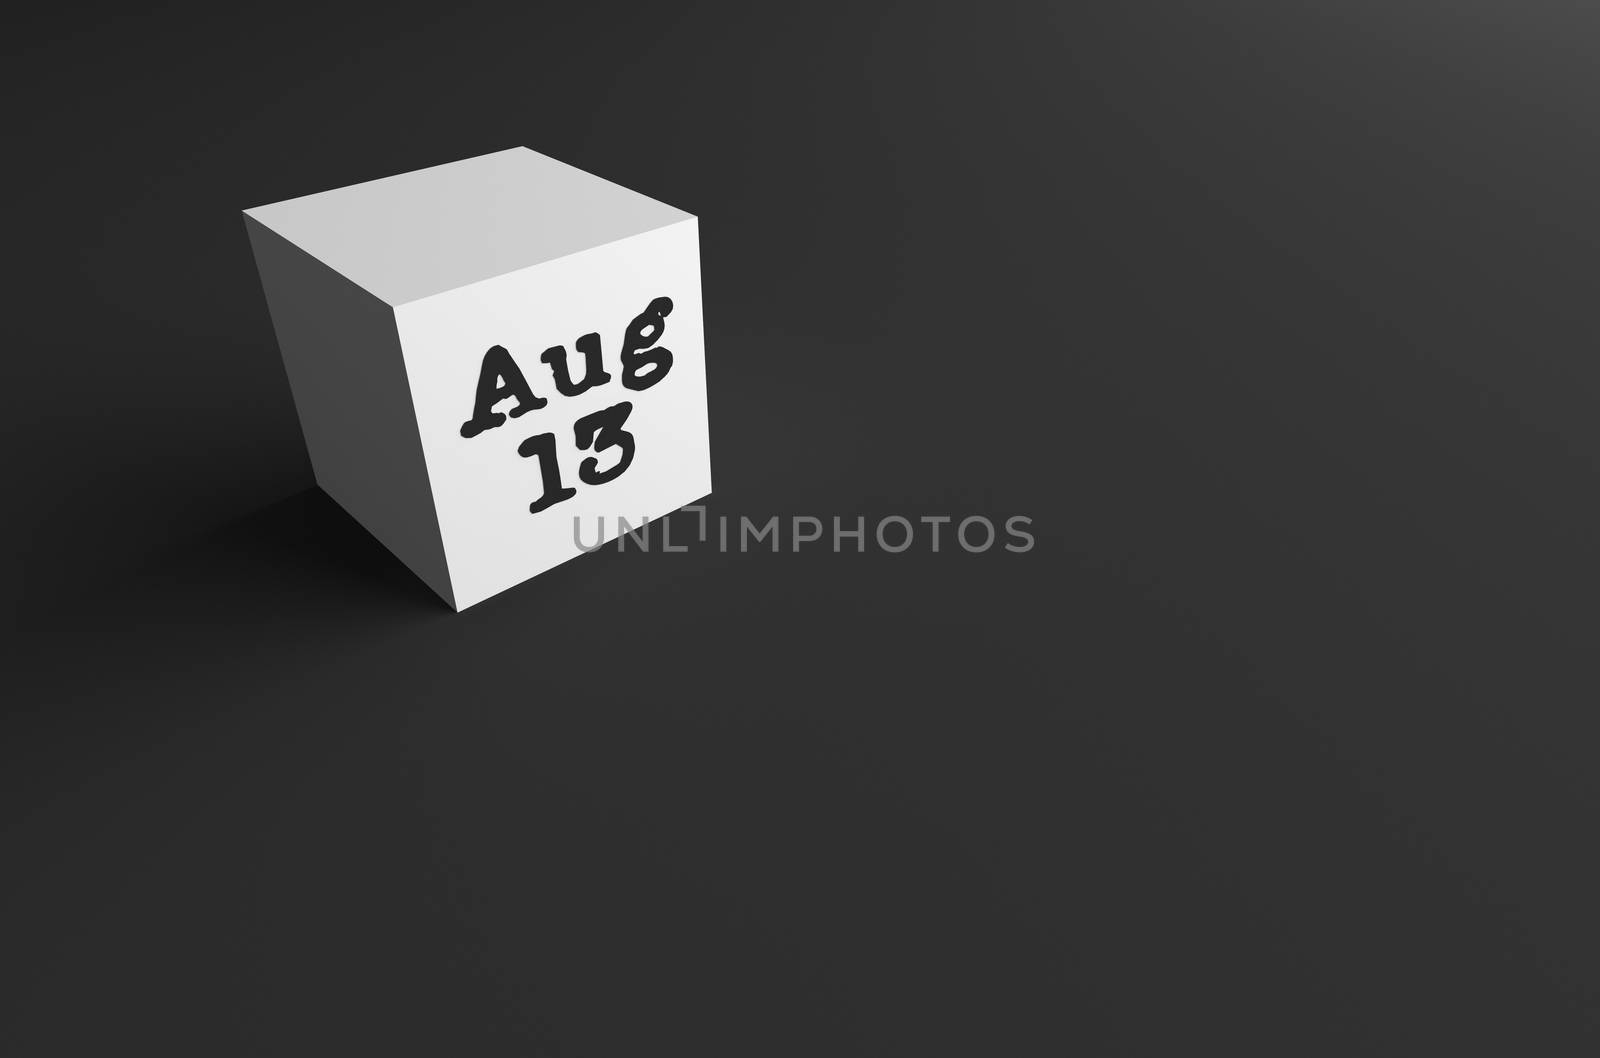 3D RENDERING OF Aug (ABBREVIATION OF AUGUST) 13 ON WHITE CUBE